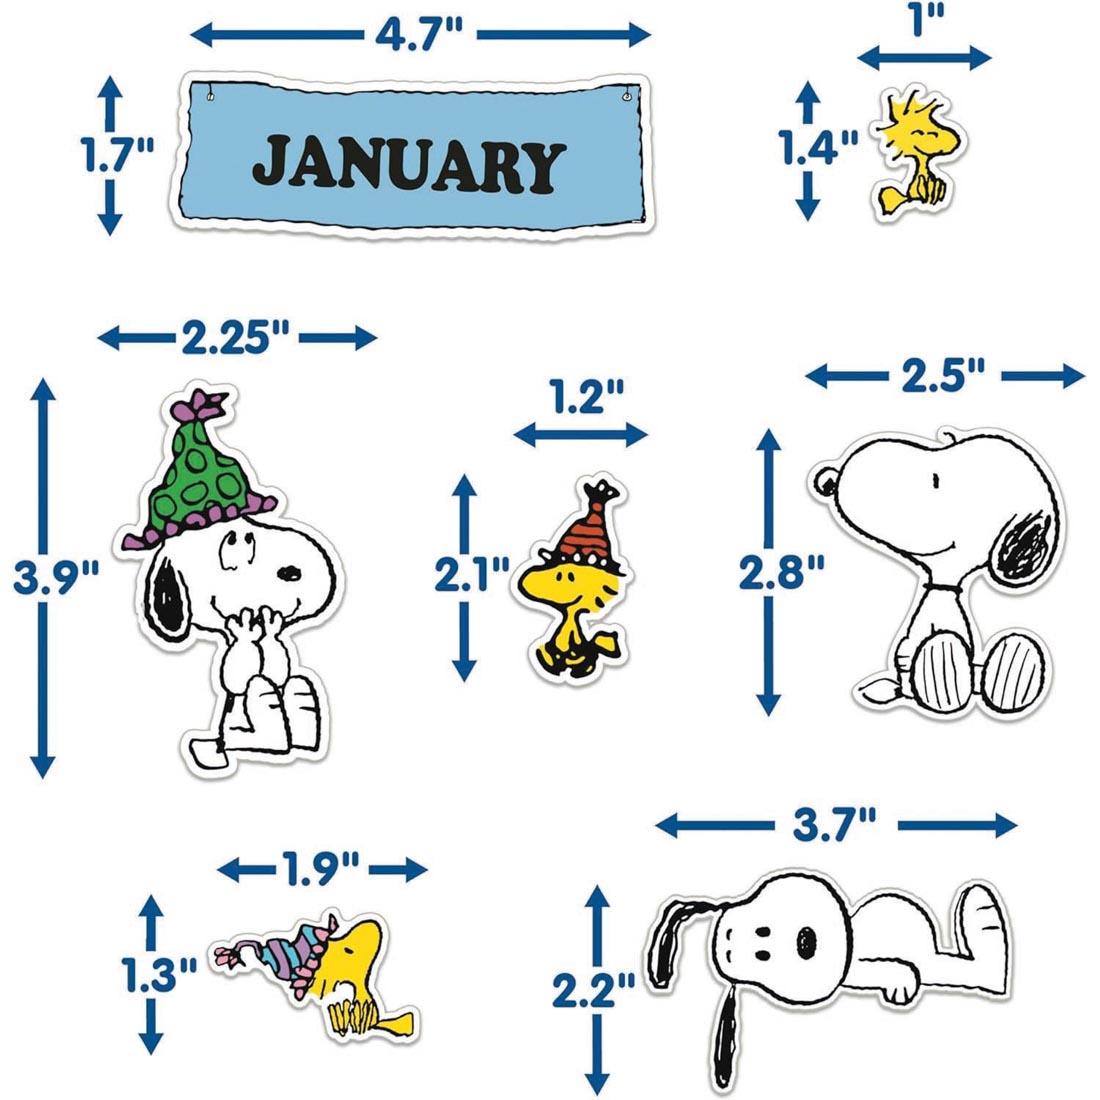 pieces from the Birthday Mini Bulletin Board Set from the Peanuts collection by Eureka labeled with their measurements